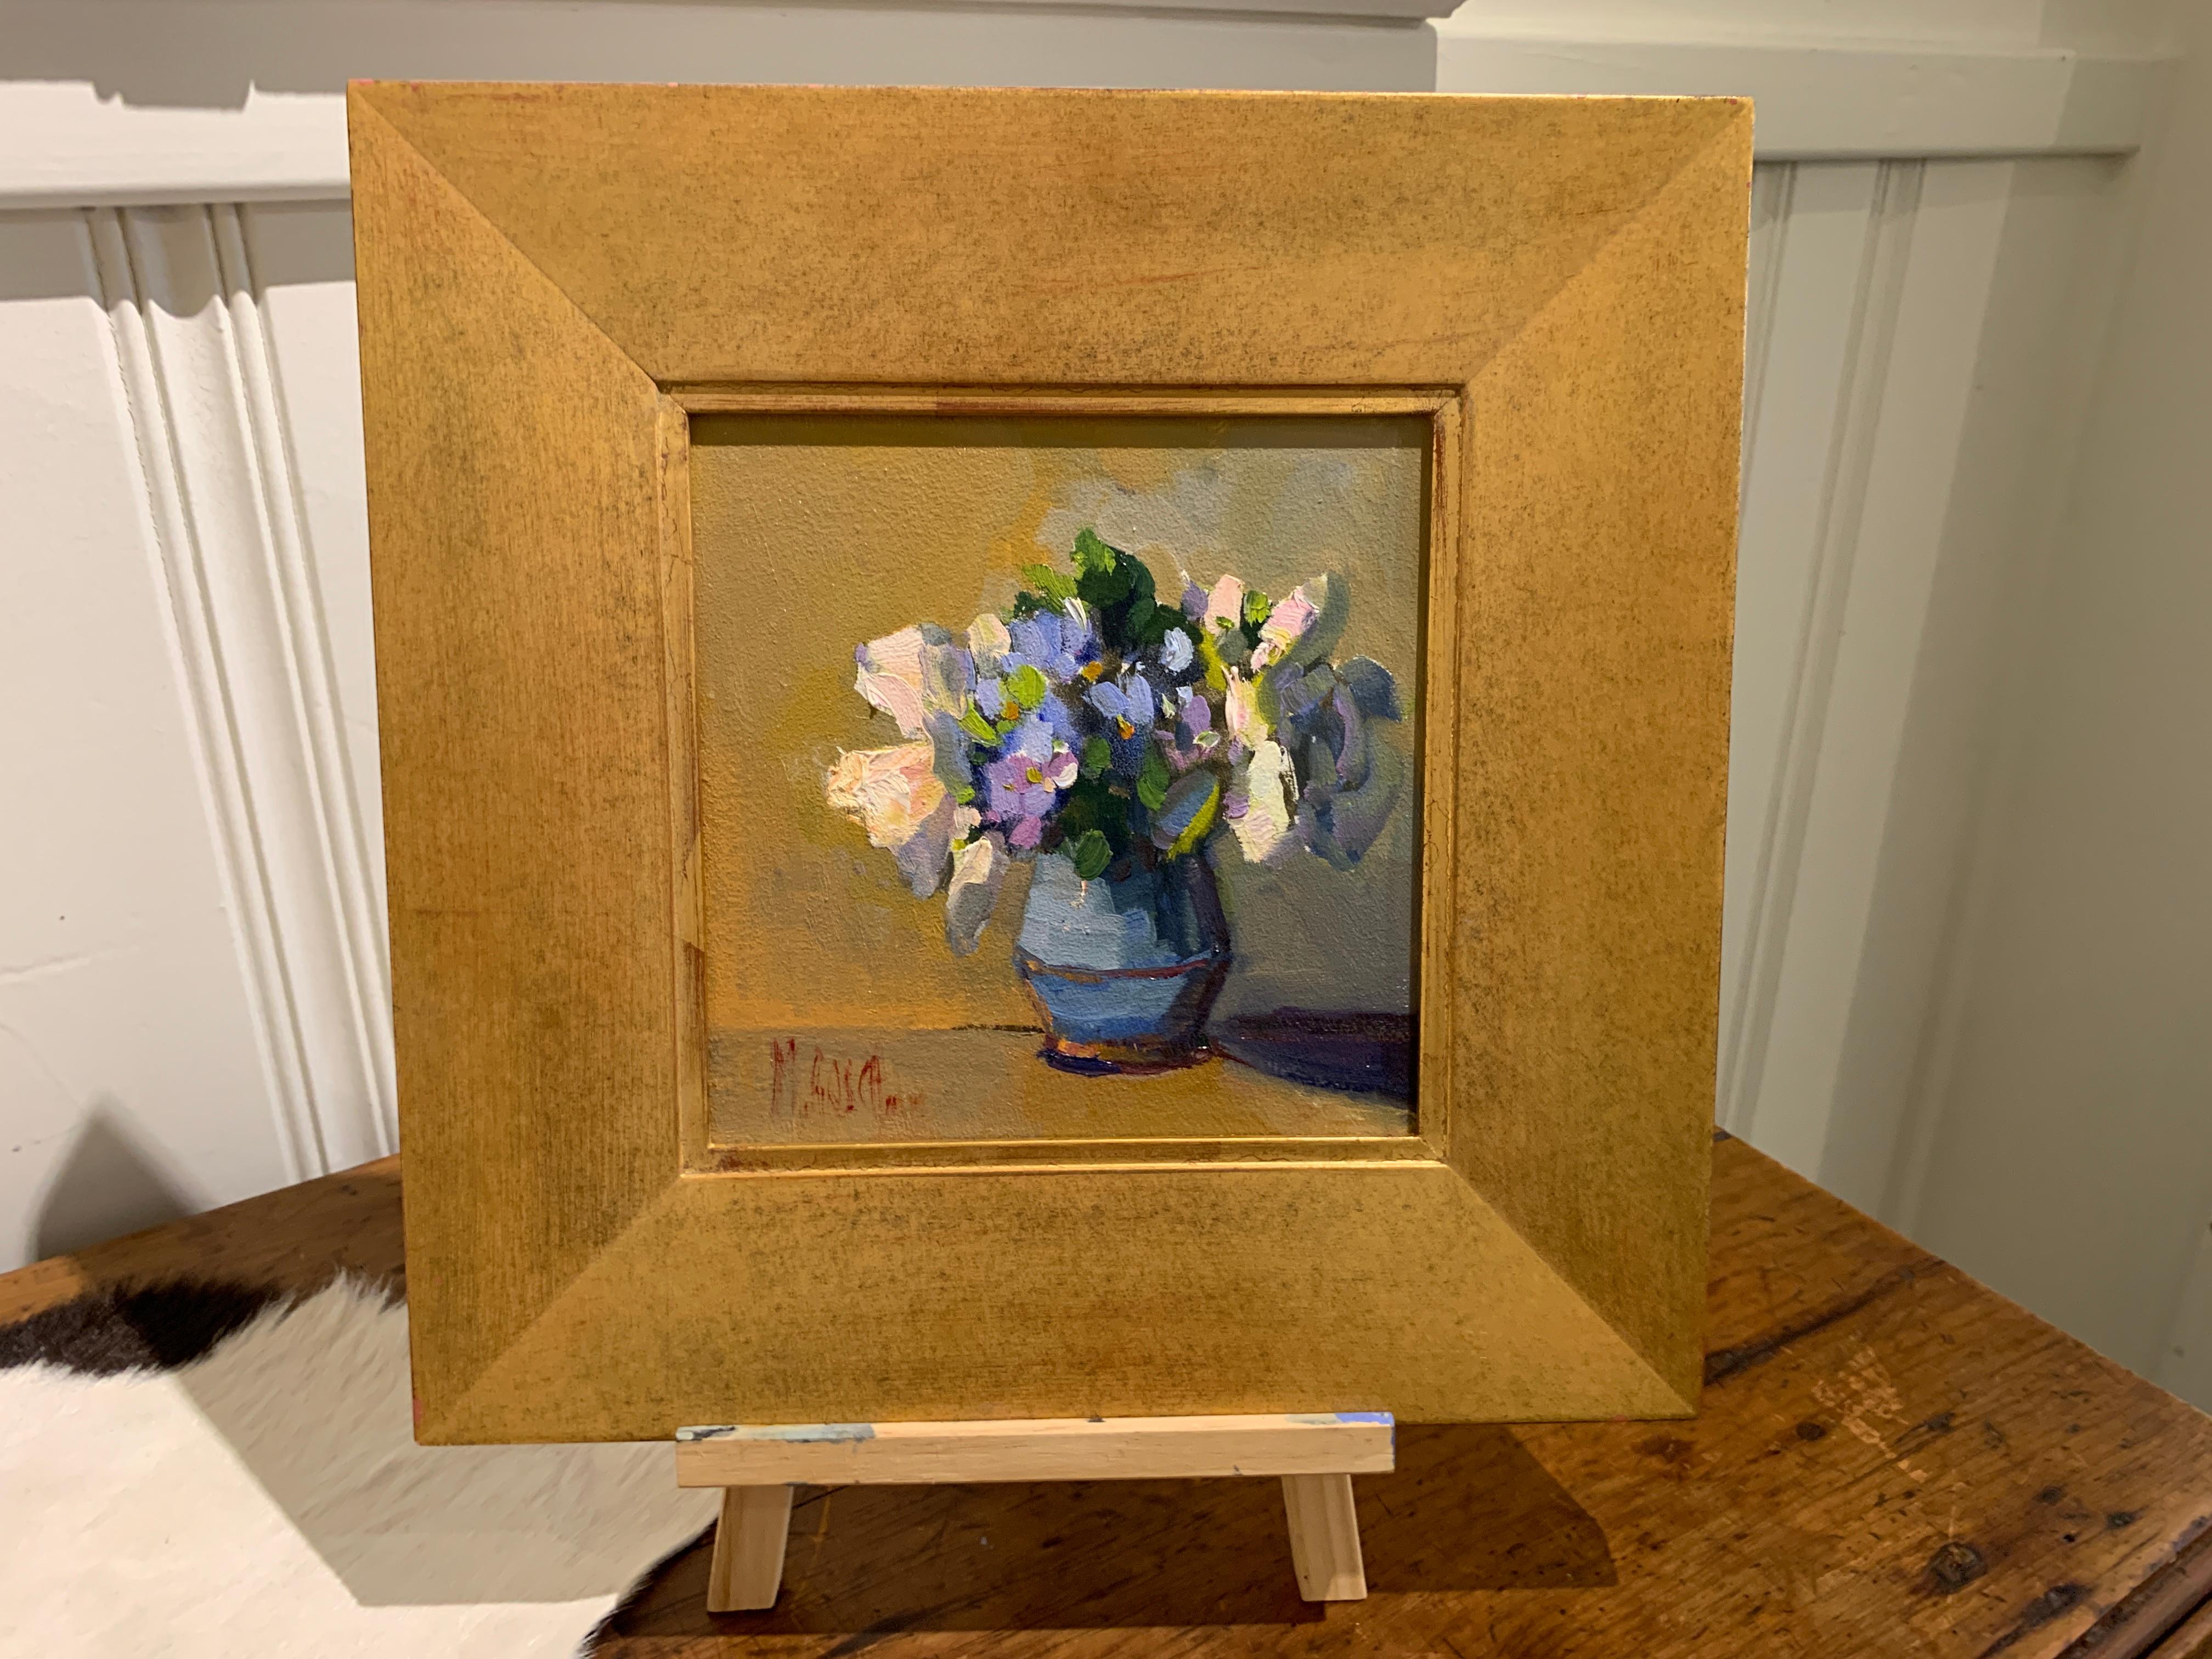 Spring Botany by Millie Gosch, Small Framed Oil on Board Still-Life Painting 2